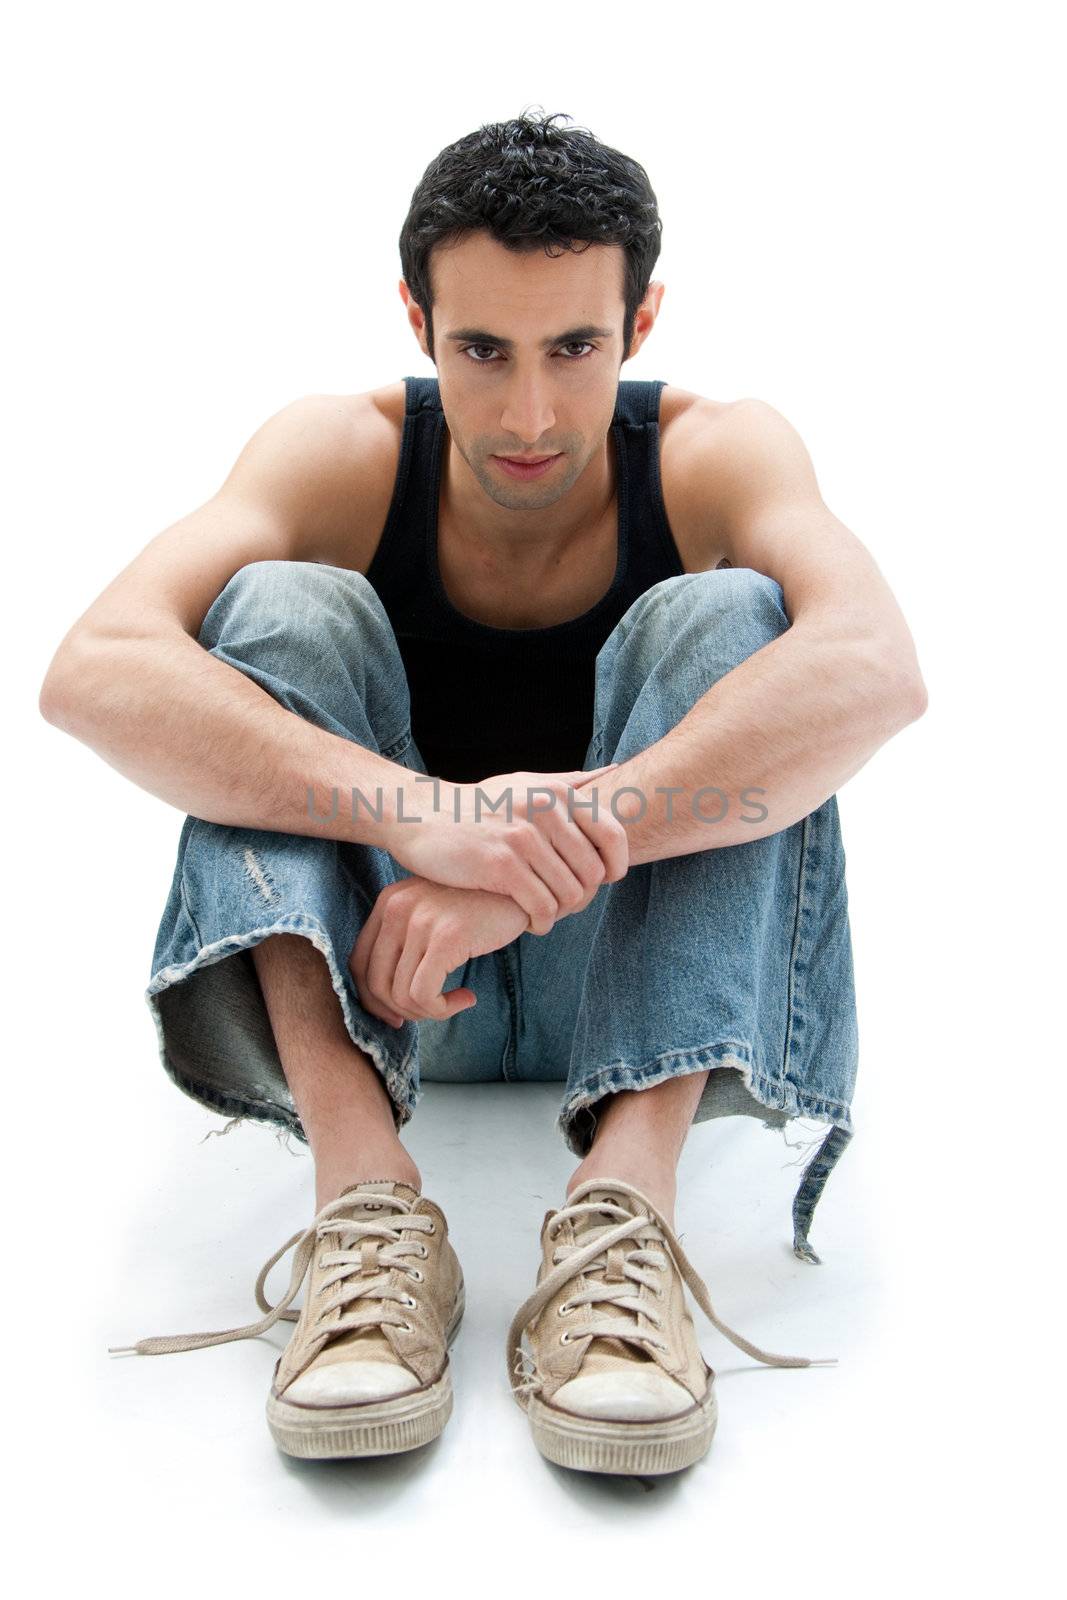 Handsome Caucasian guy wearing black tank top and jeans sitting on floor with arms around knees, isolated